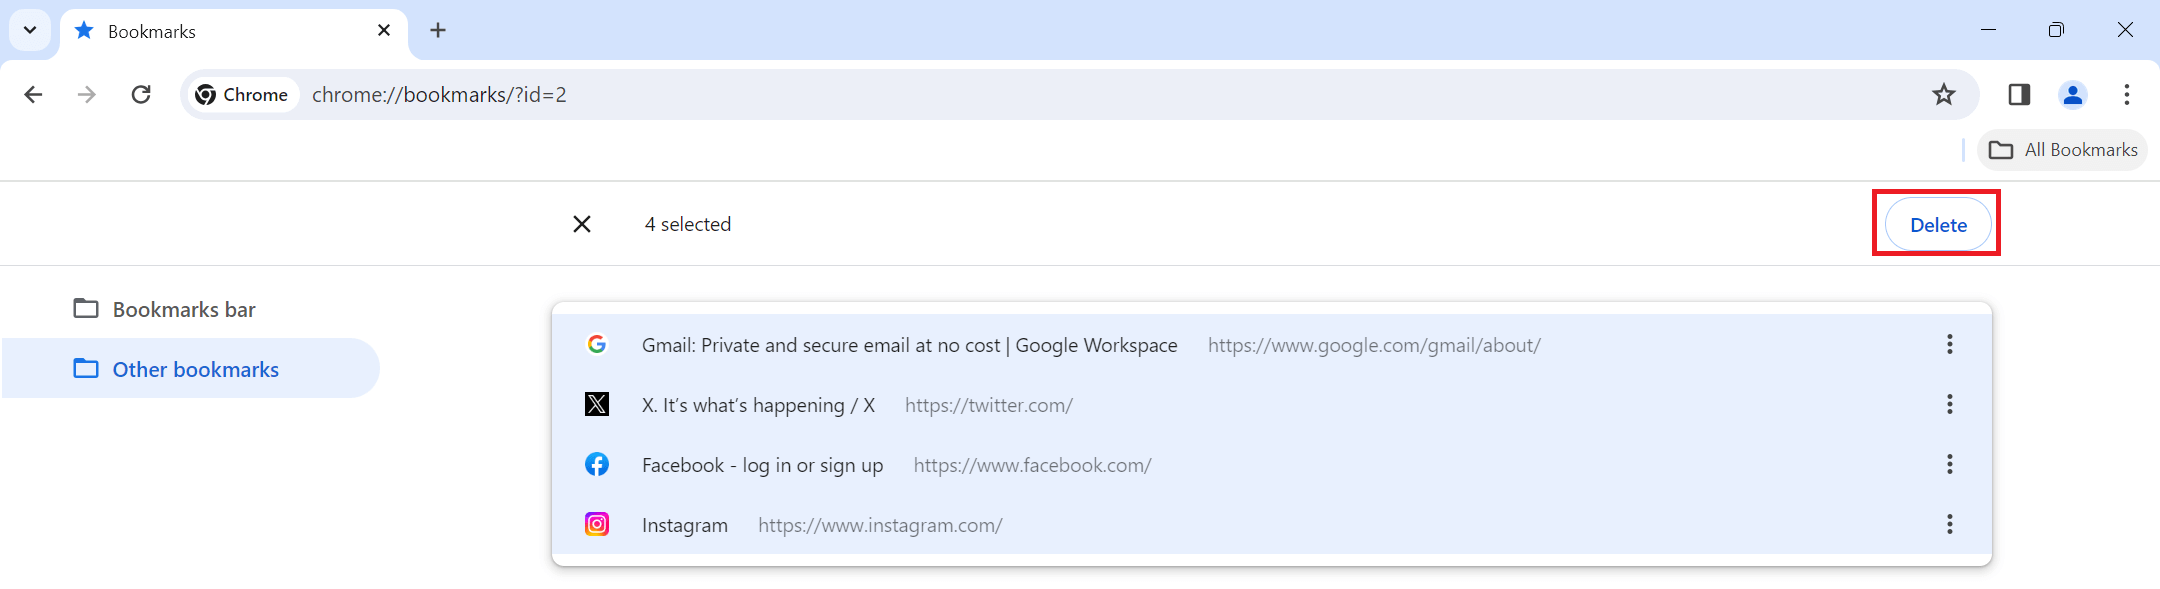 "Delete" option highlighted in Google Chrome Bookmark manager.